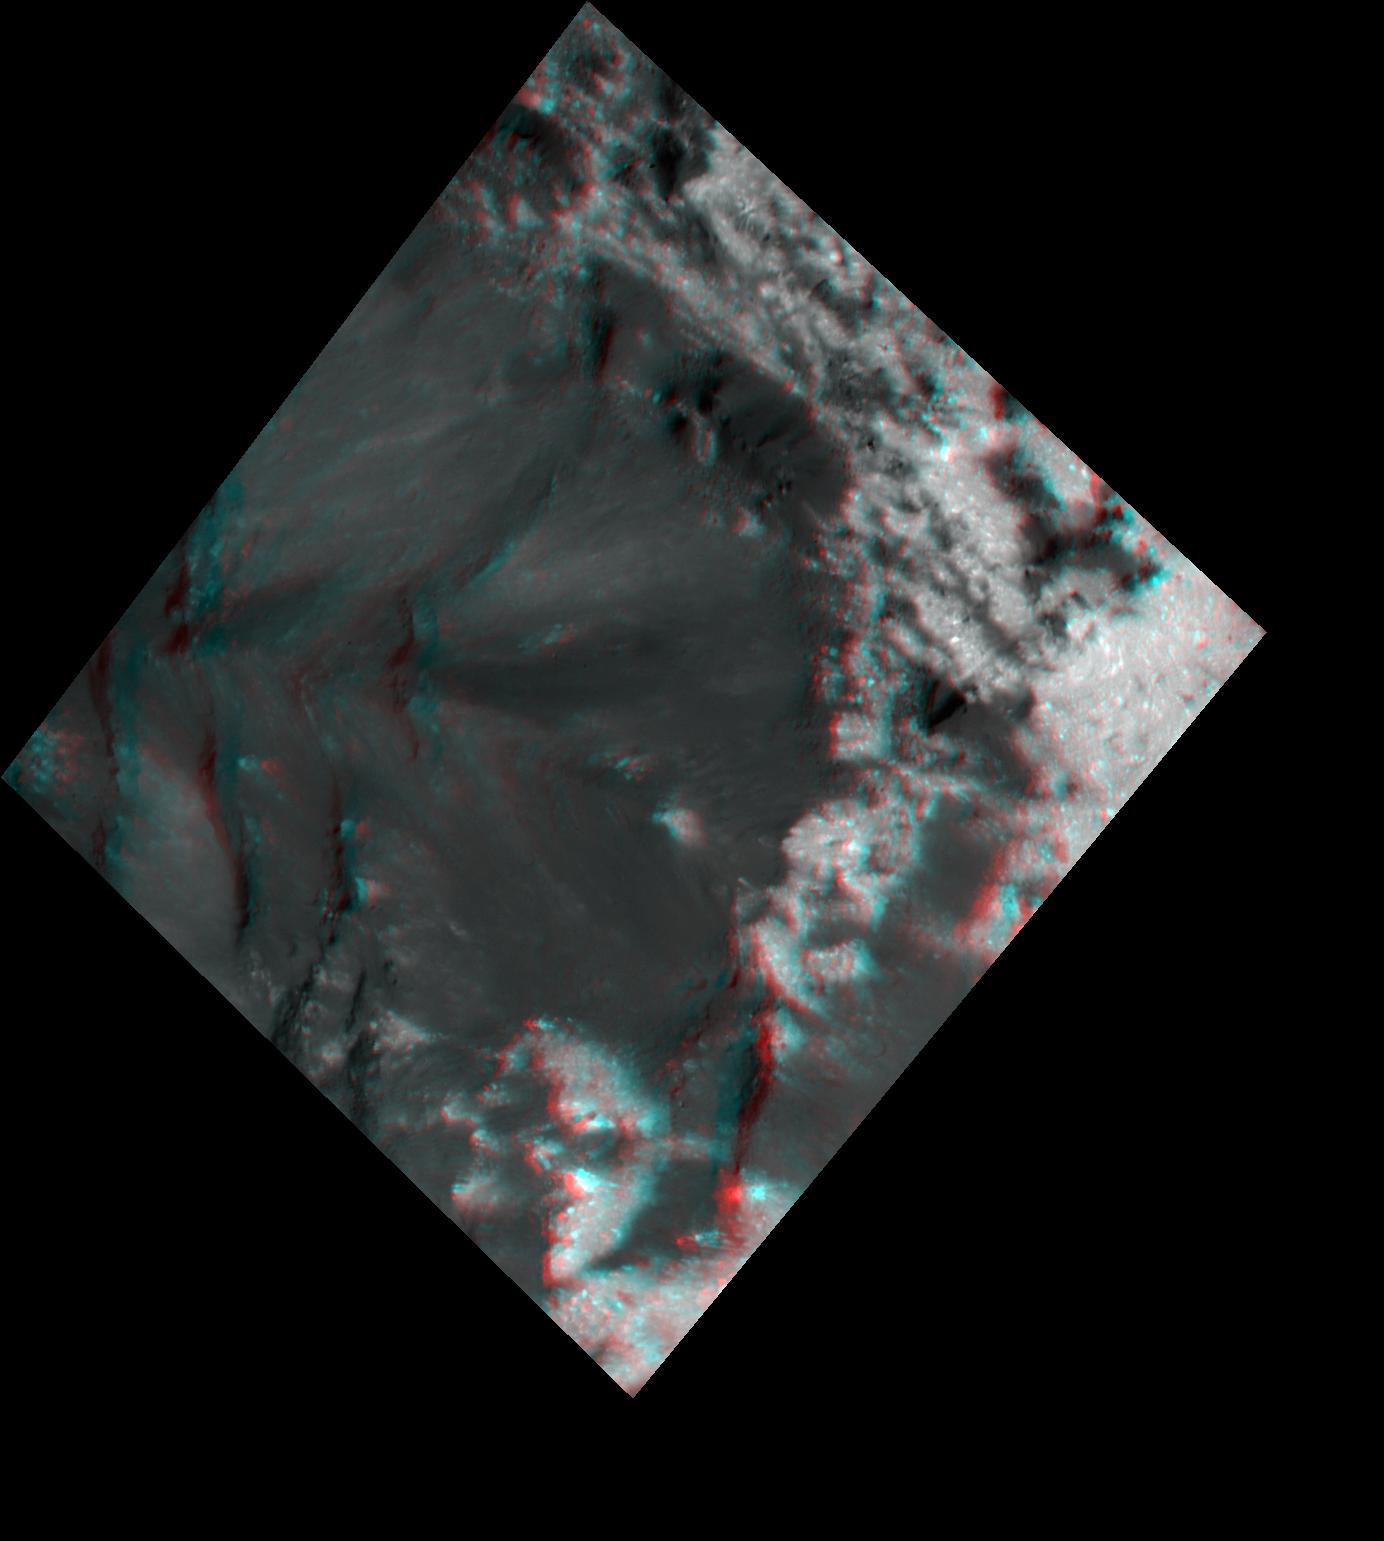 PIA22863: Bright and Dark Pattern on Occator Crater's Floor (3-D)